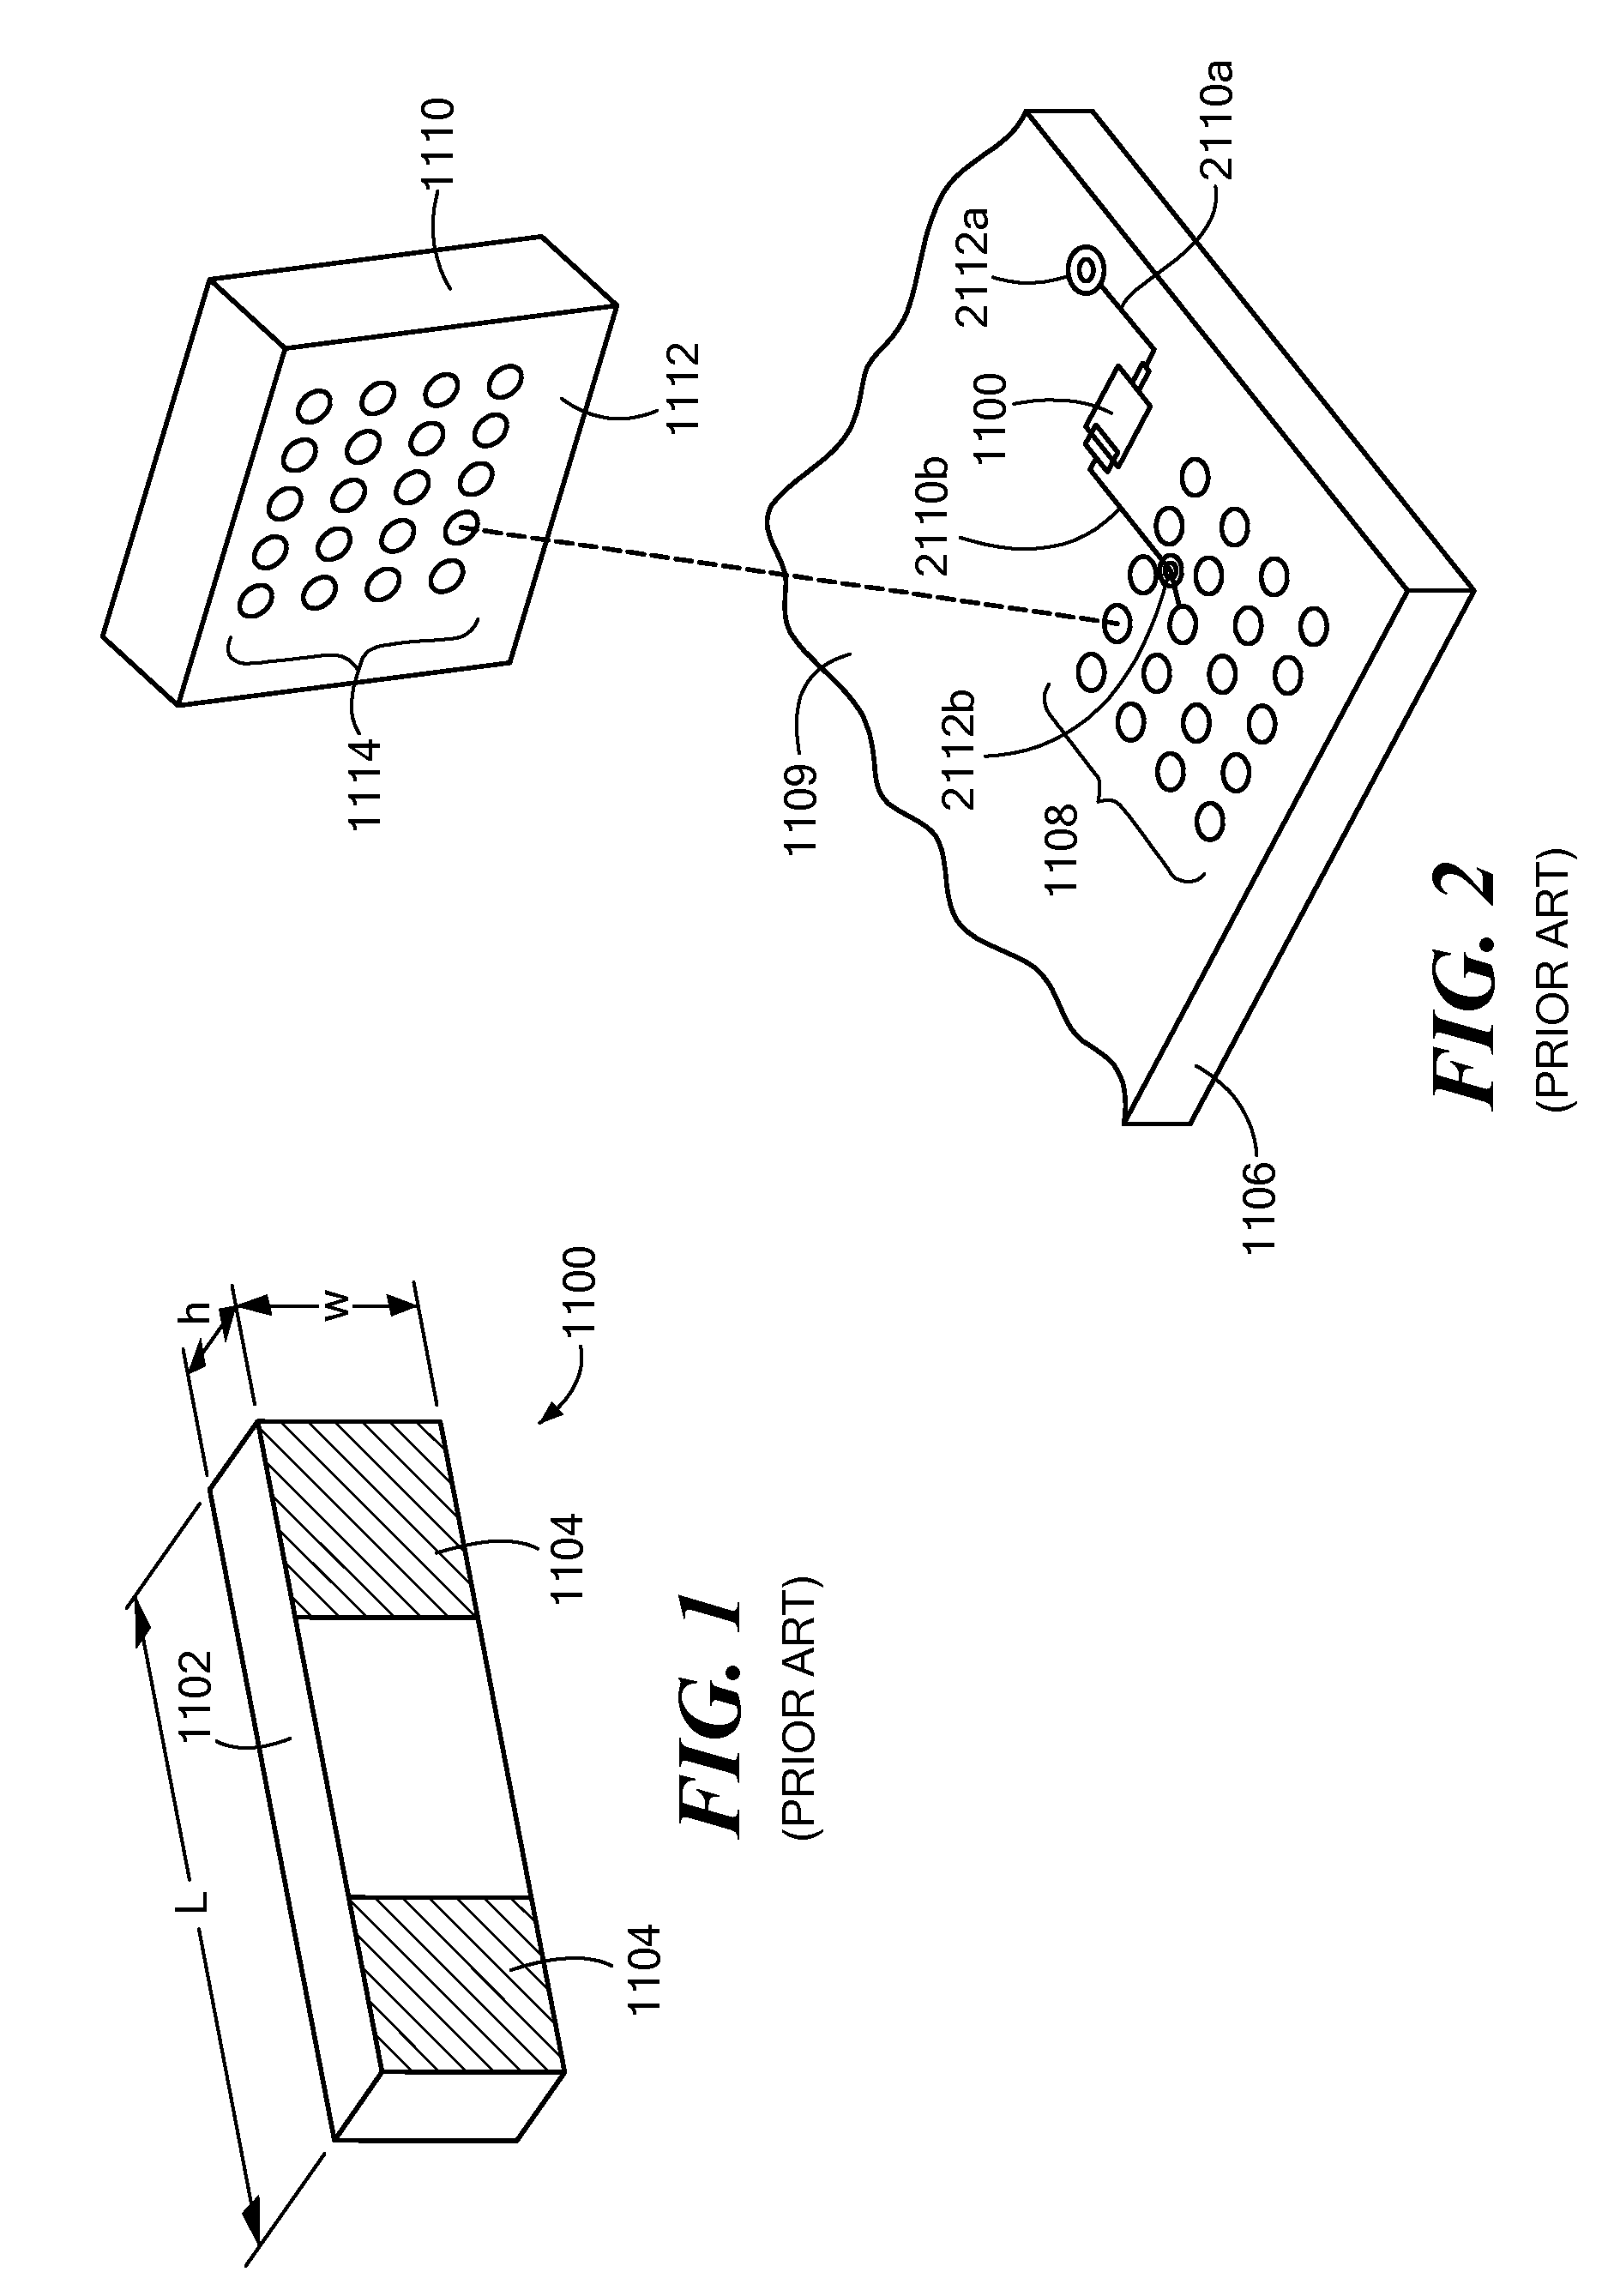 Interconnect device with discrete in-line components